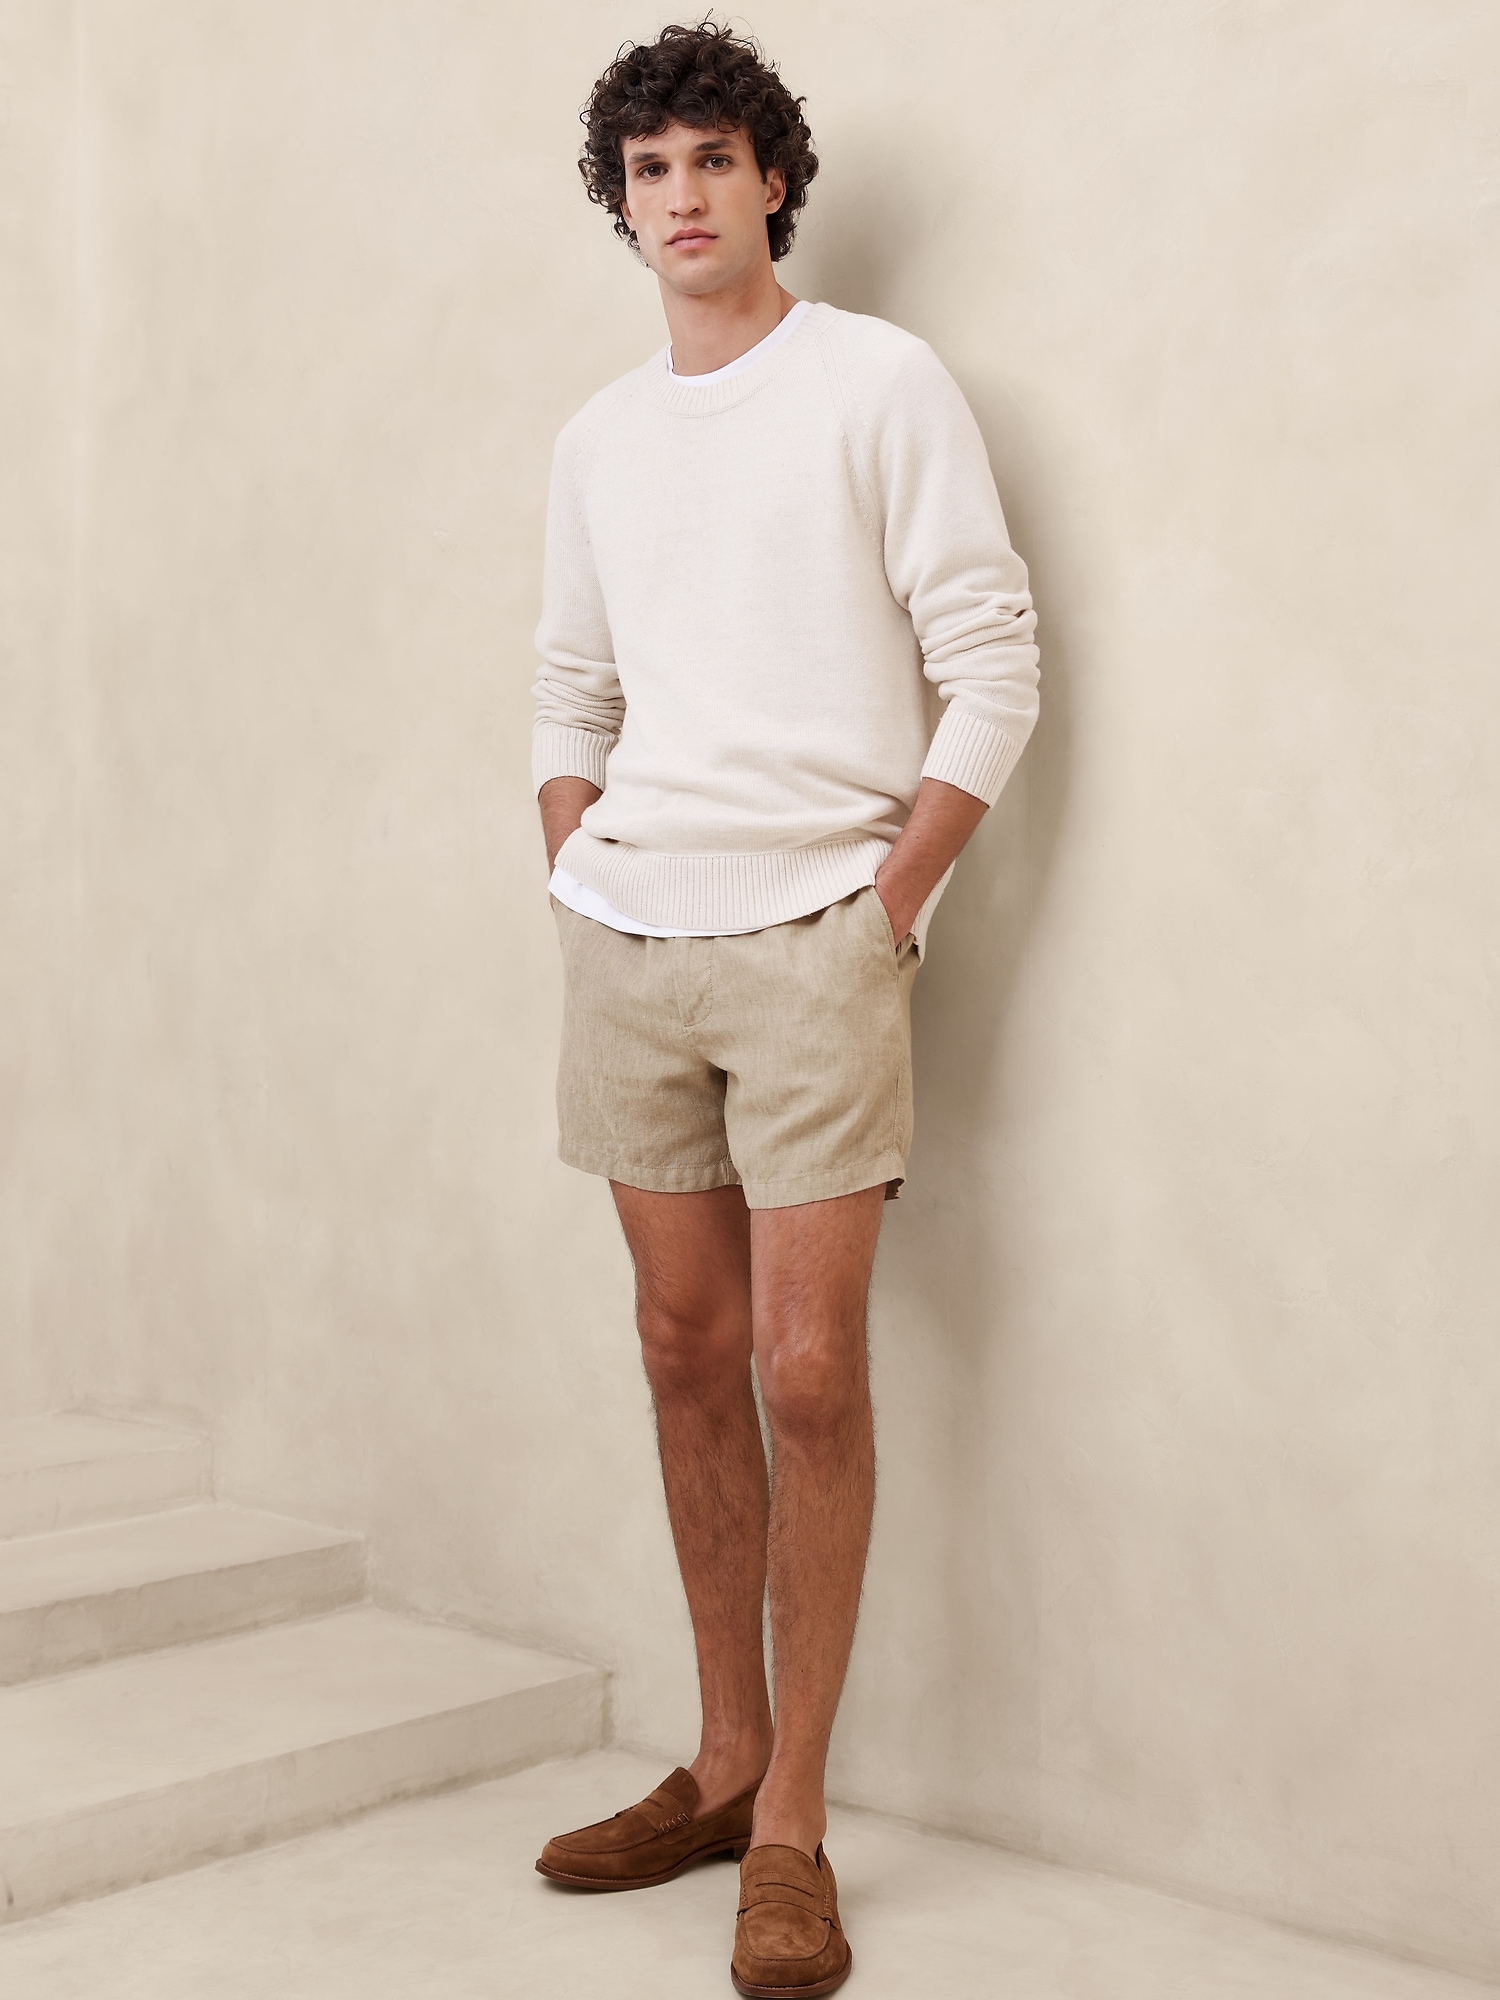 Men's Loose Fit 5-inch Inseam Shorts For Summer Casual Style